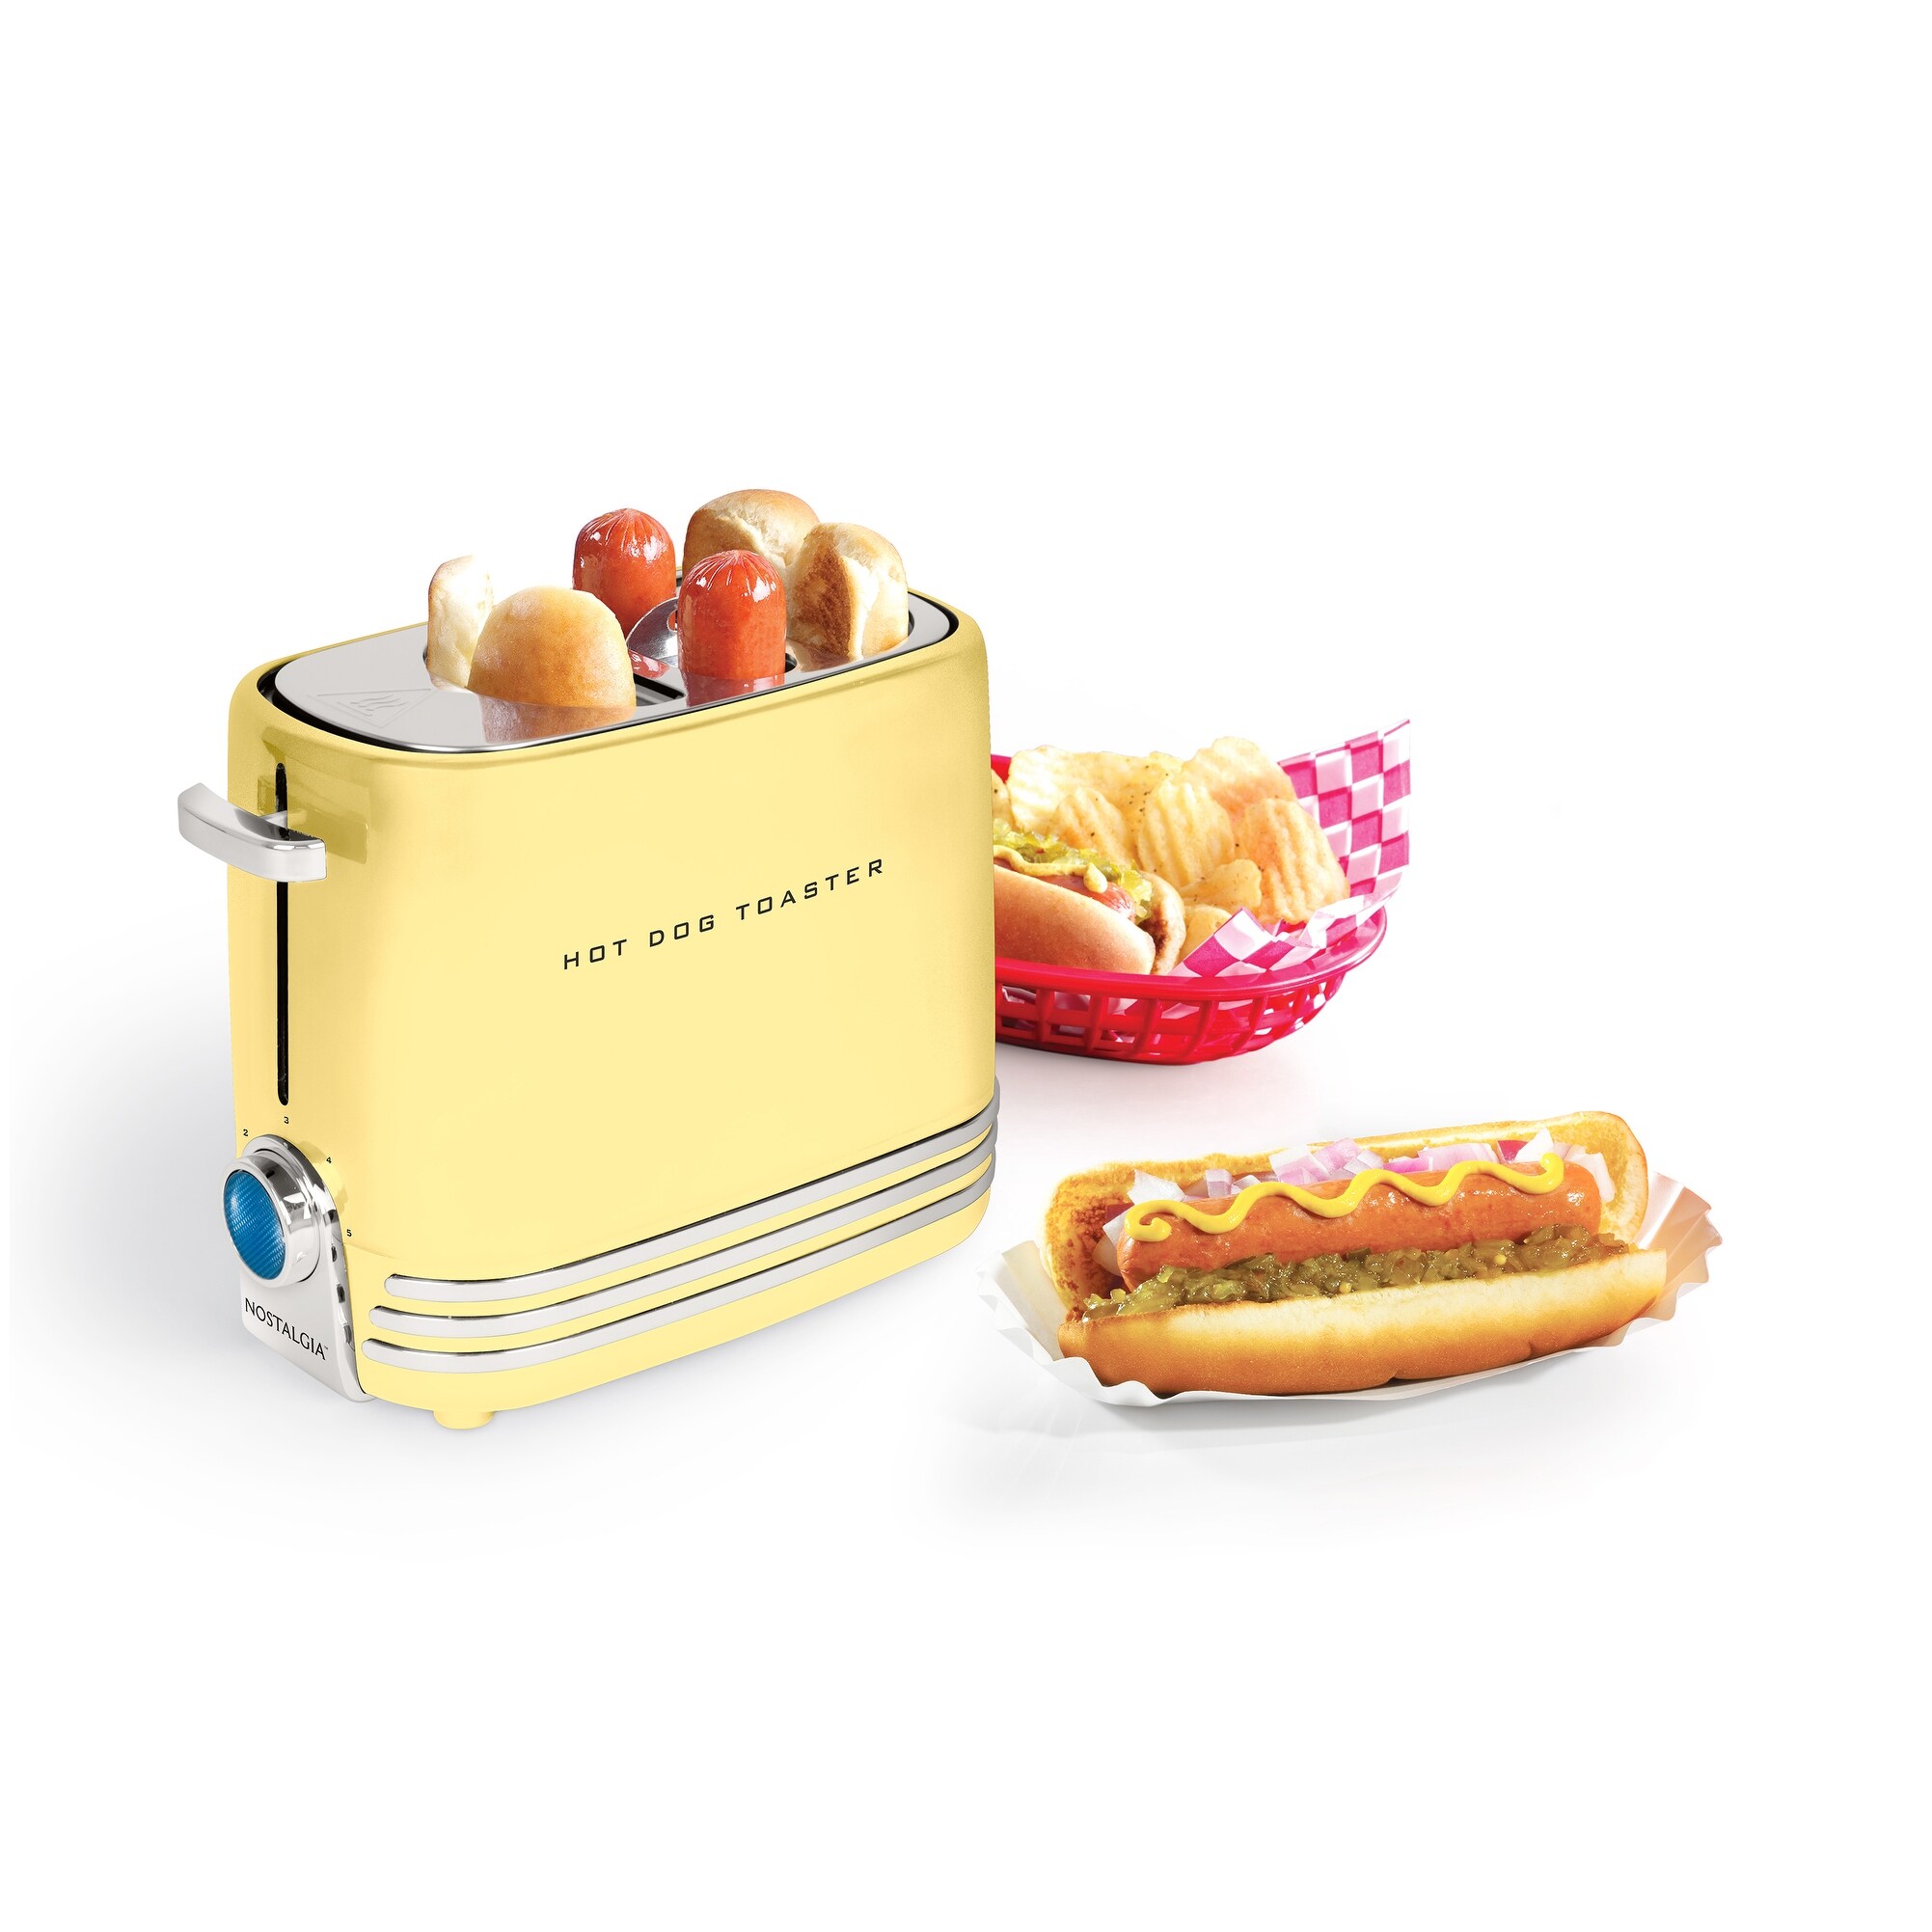 https://ak1.ostkcdn.com/images/products/is/images/direct/ac12c747fa44963d14100c0c47d878afbe18c036/Nostalgia-Adjustable-5-Setting-Retro-Pop-Up-Hot-Dog-Toaster.jpg